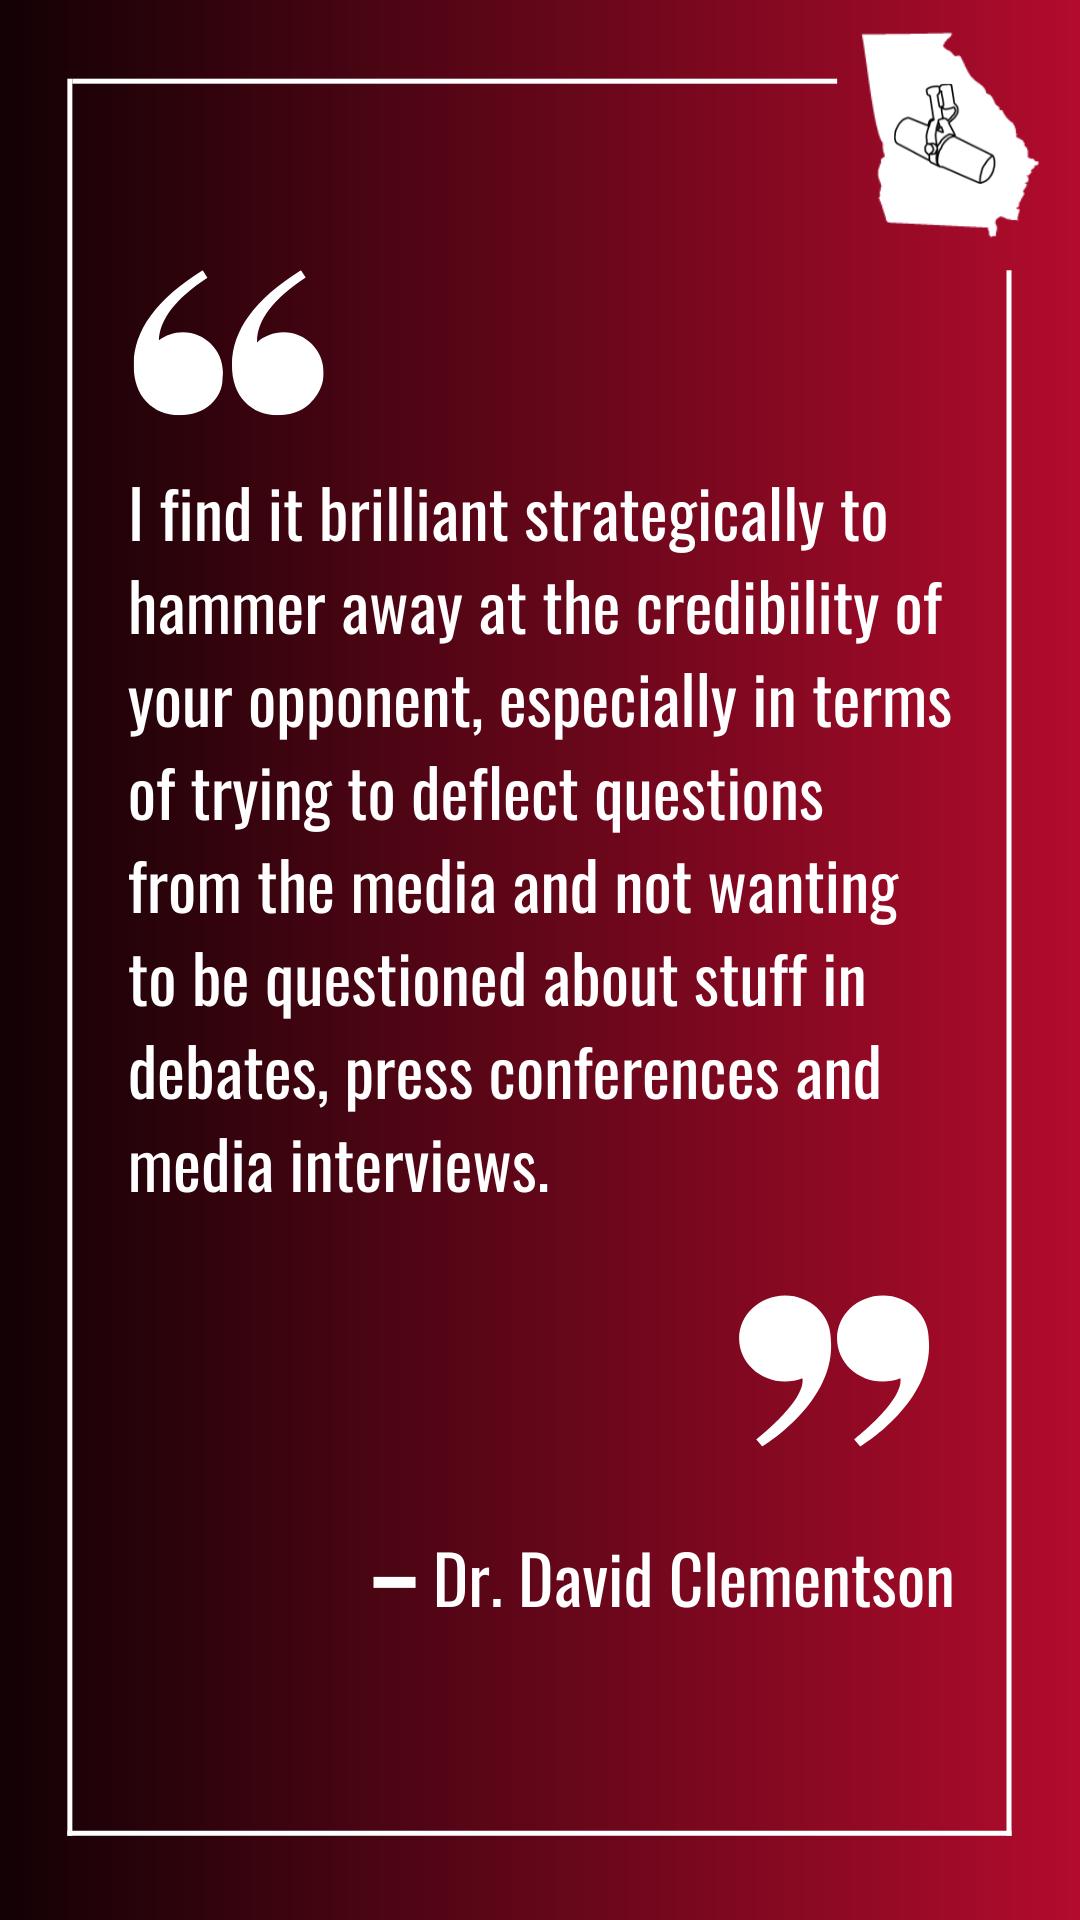 A quote graphic that reads "I find this just brilliant strategically to hammer away at the credibility of your opponent, especially in terms of trying to deflect questions from the media and not wanting to be questioned about stuff in debates, press conferences and media interviews."